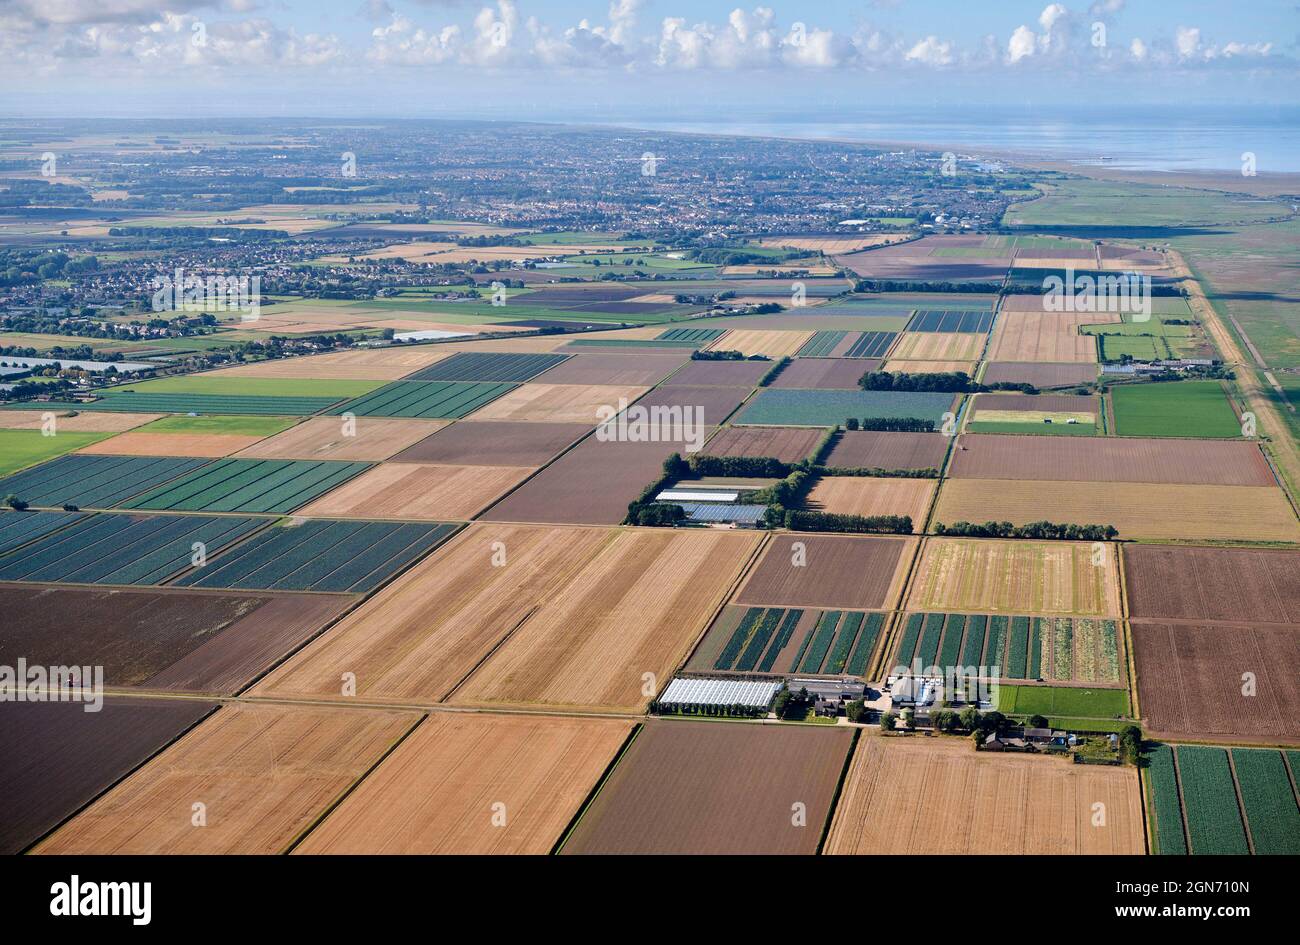 Field patterns in High yield market gardening agricultural land near Hesketh Bank, west Lancashire, North West England, UK Stock Photo